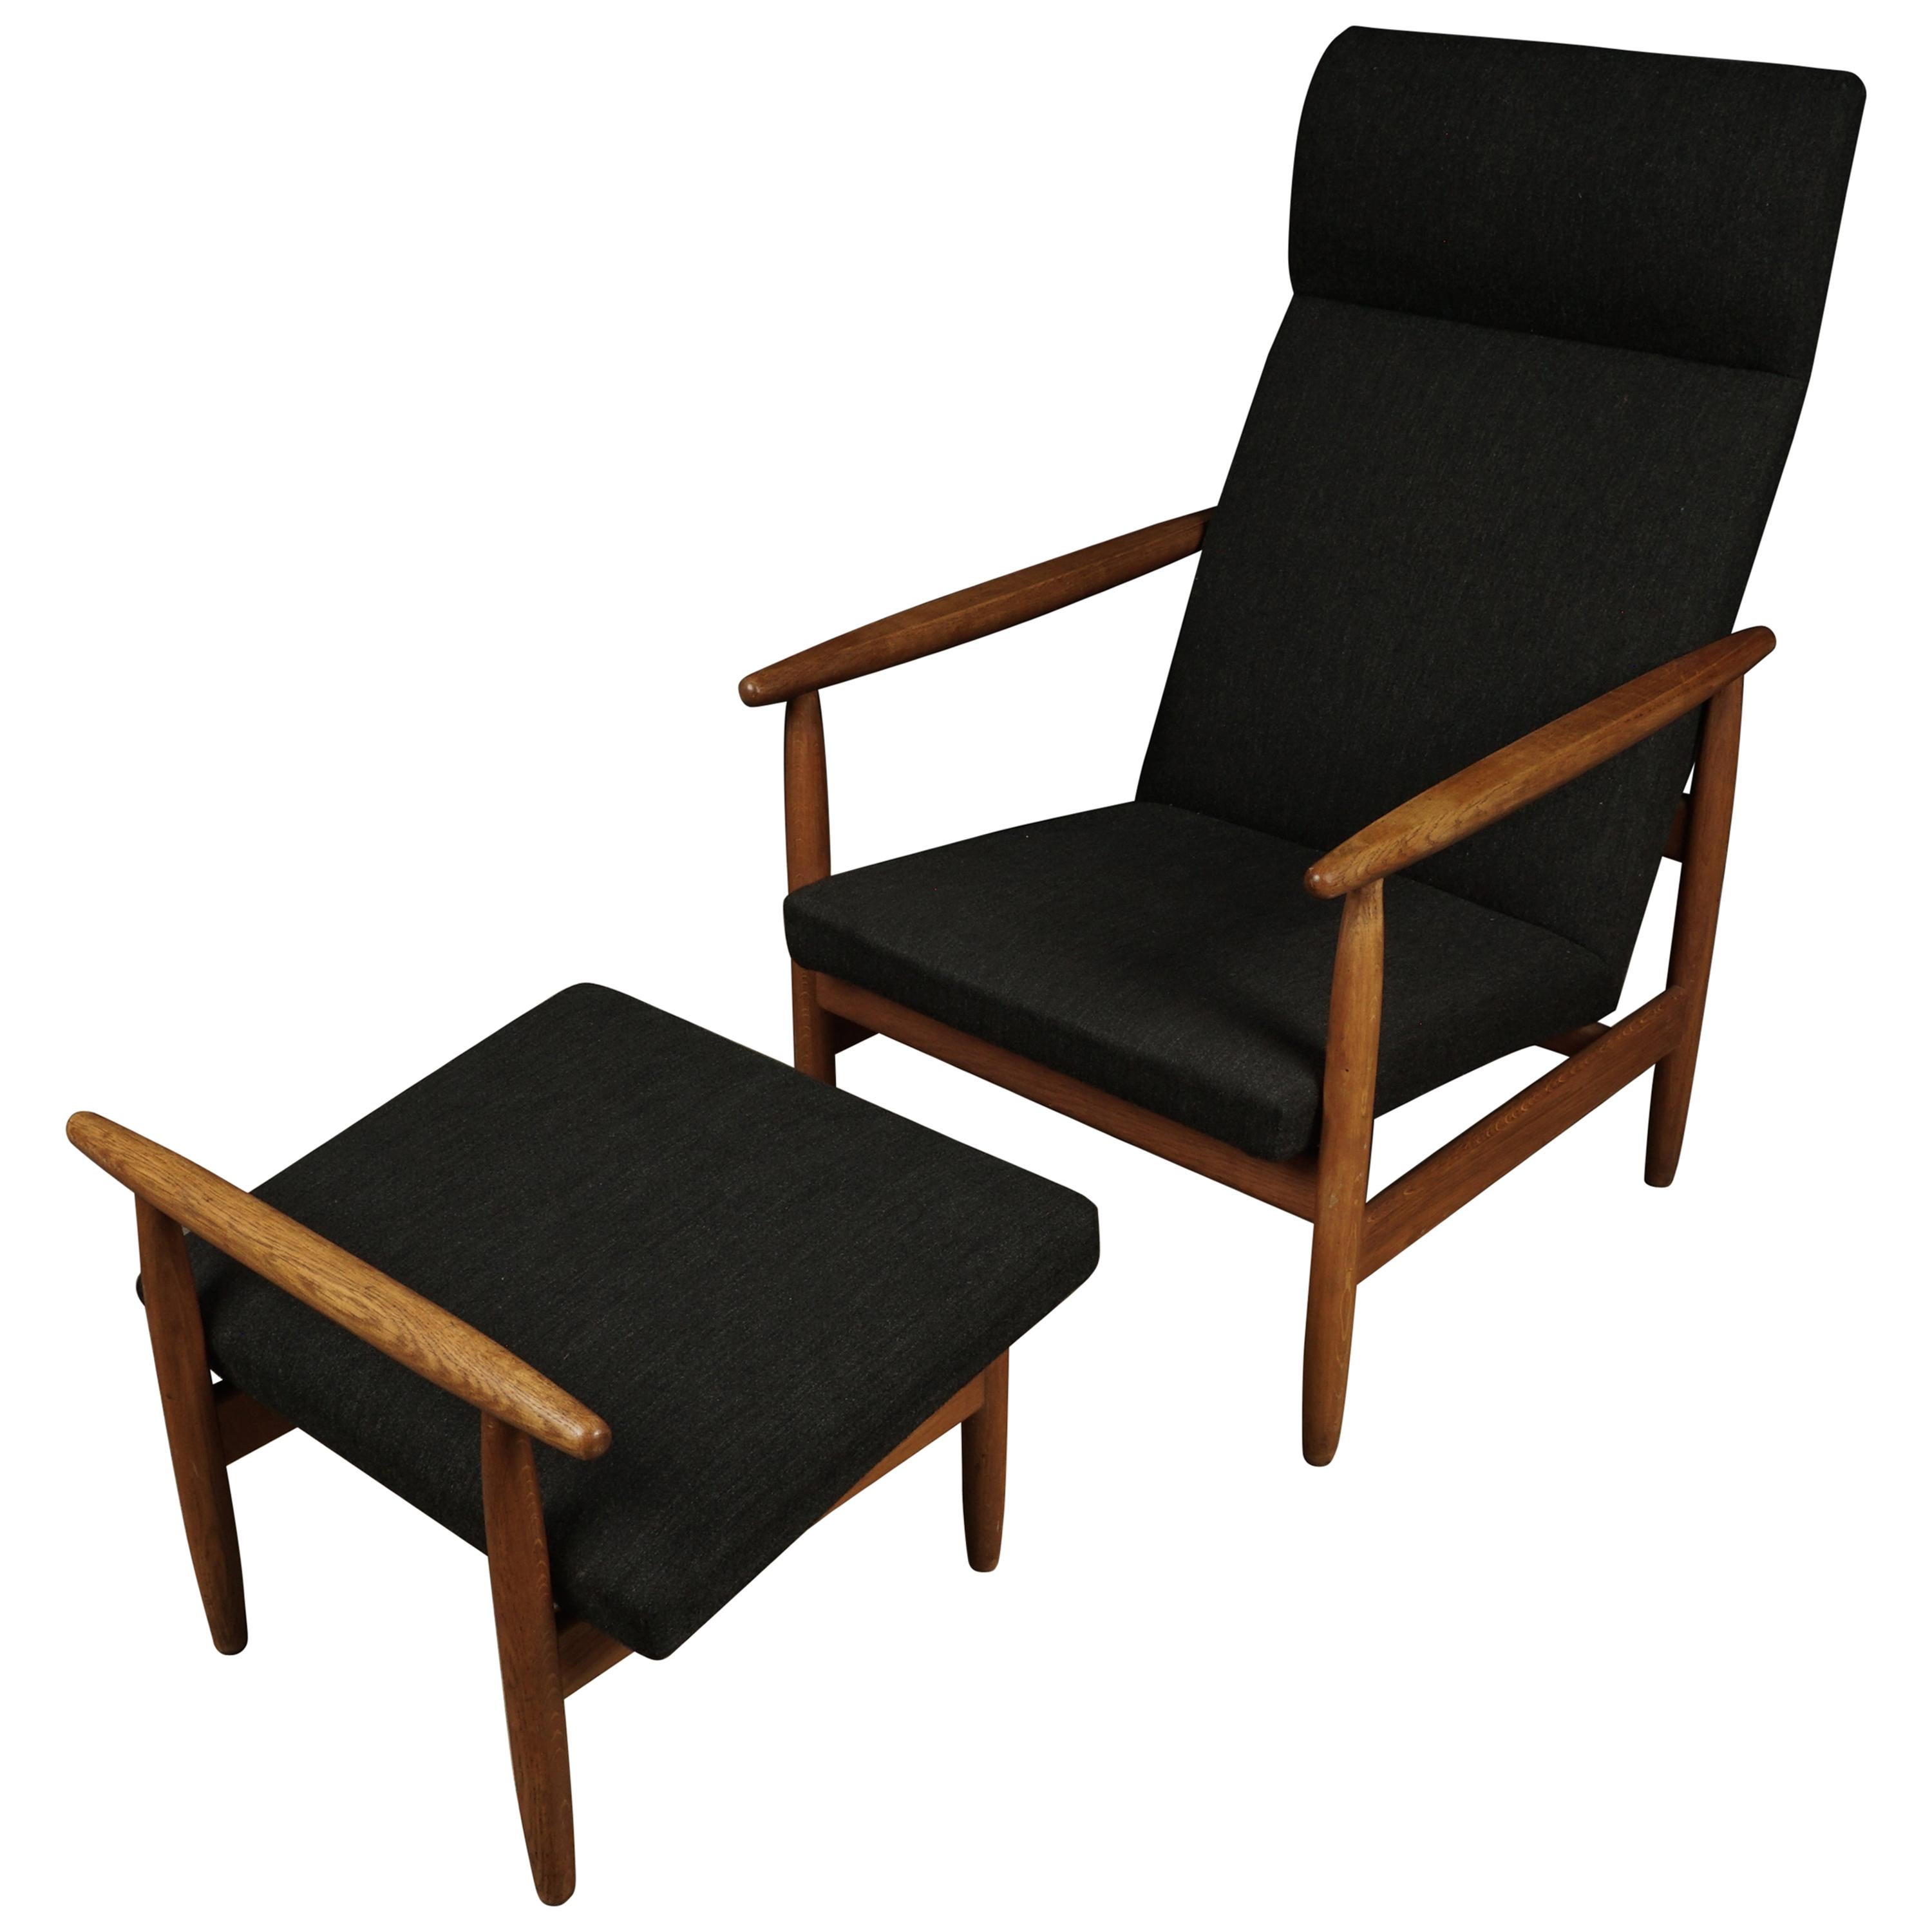 Vintage Lounge Chair and Ottoman Designed by Elvind Johansson, Denmark, 1960s